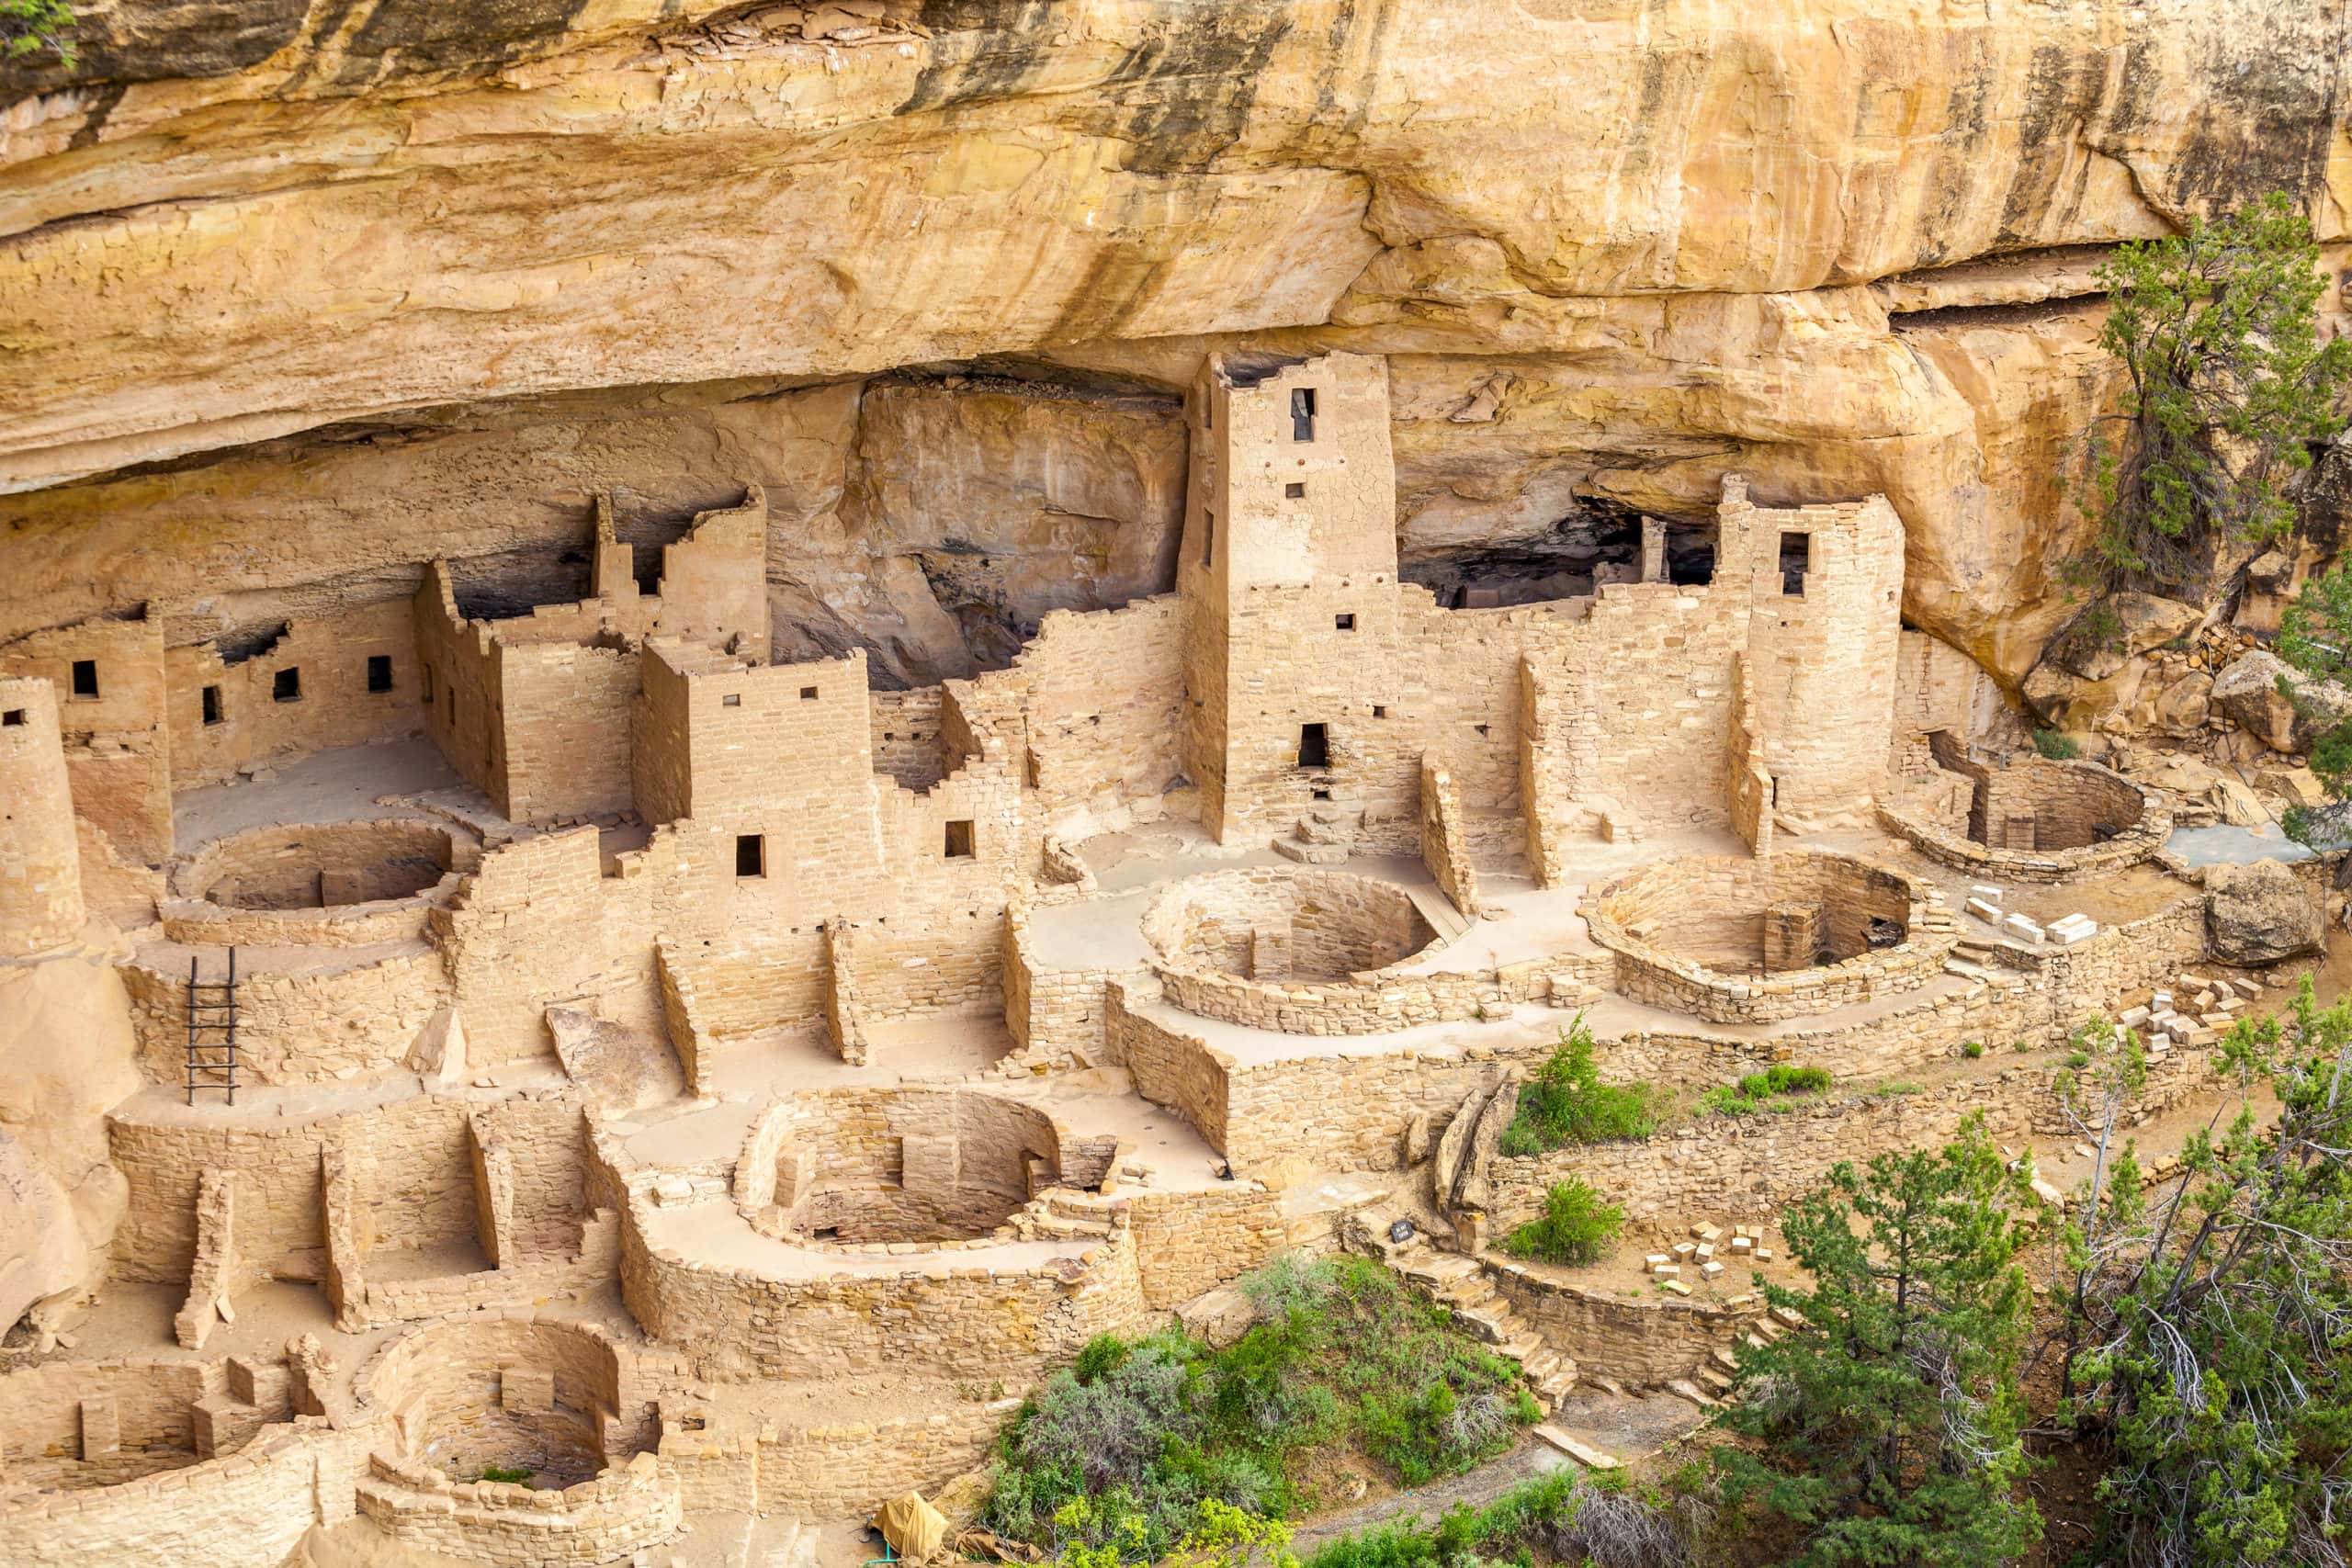 Cliff dwellings in Mesa Verde National Parks Colorado USA scaled from Tumbleweed Travel